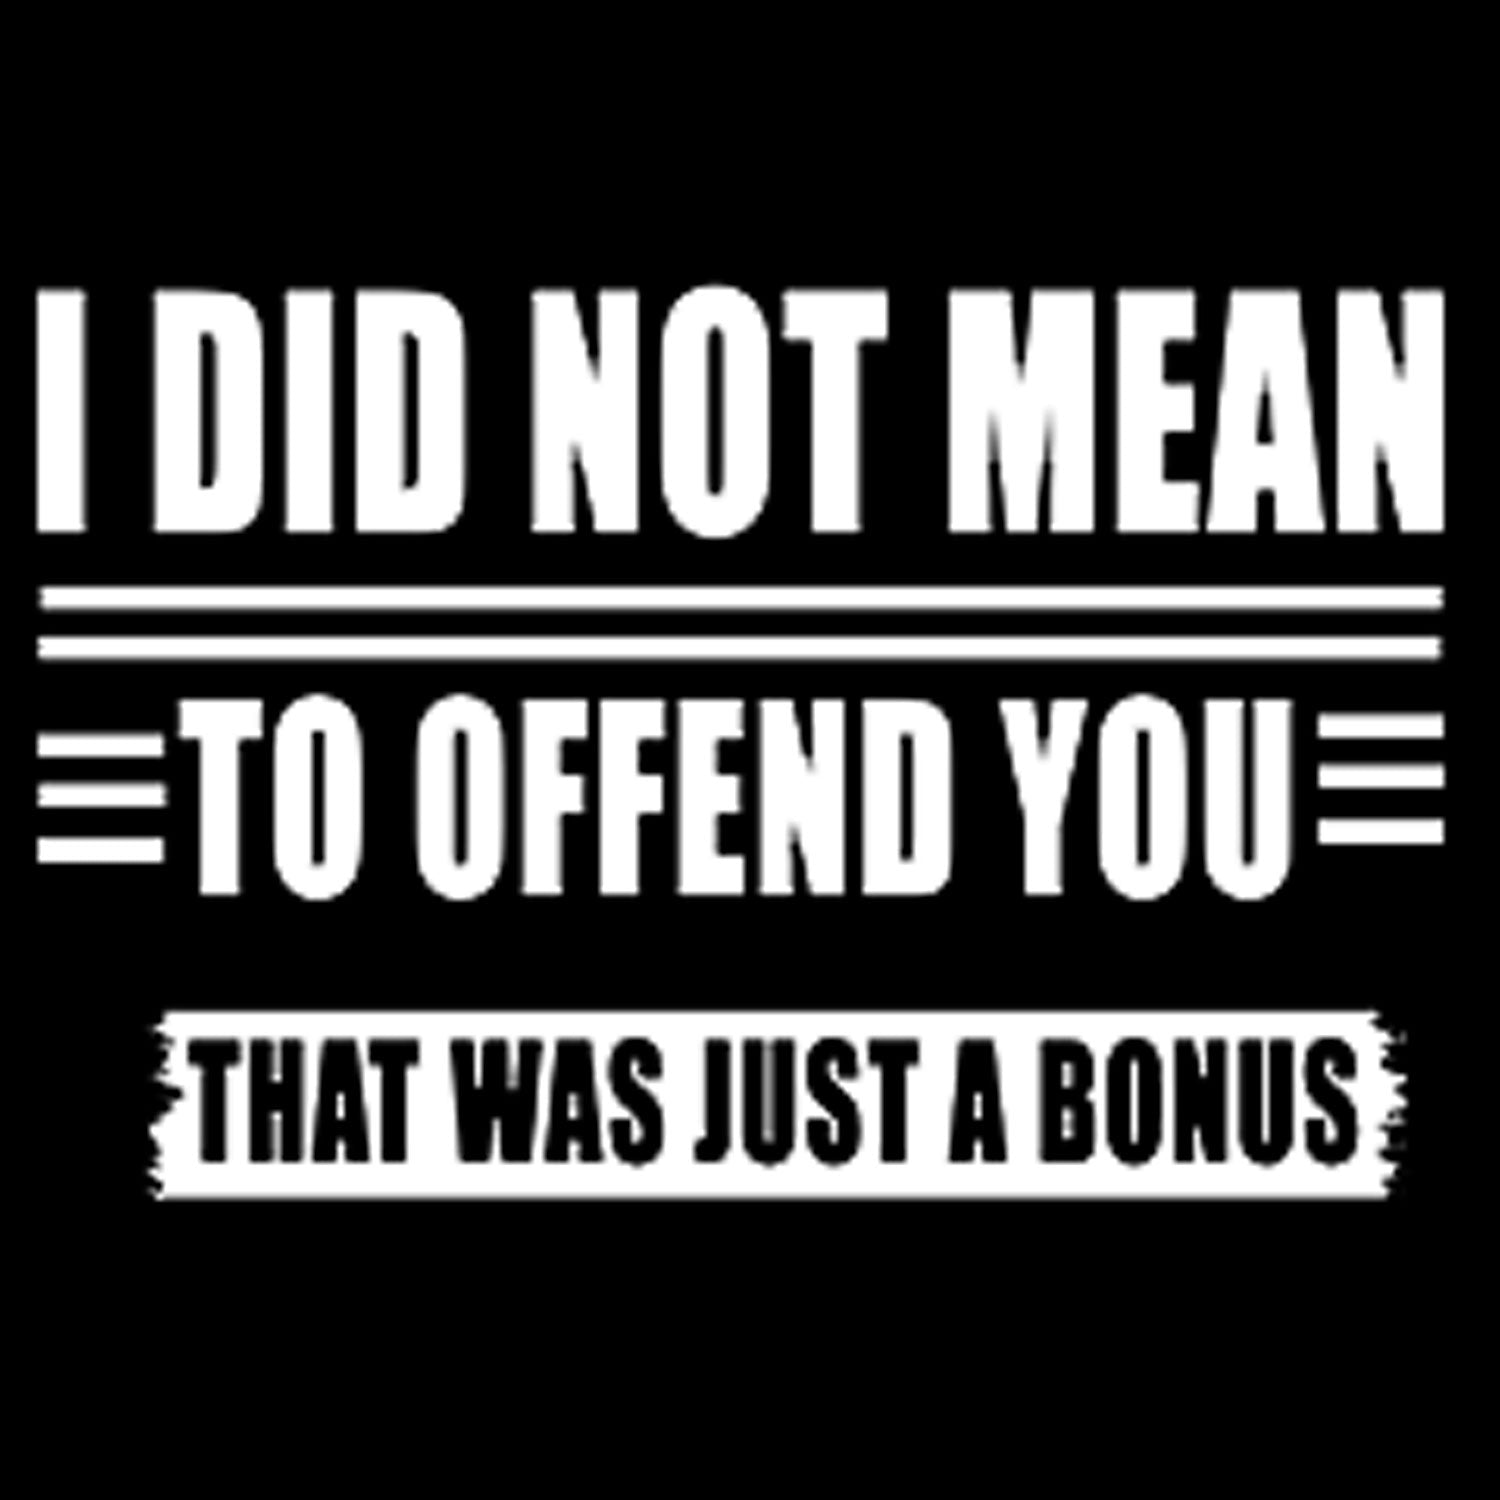 I Did Not Mean To Offend You Printed T-Shirt-Black